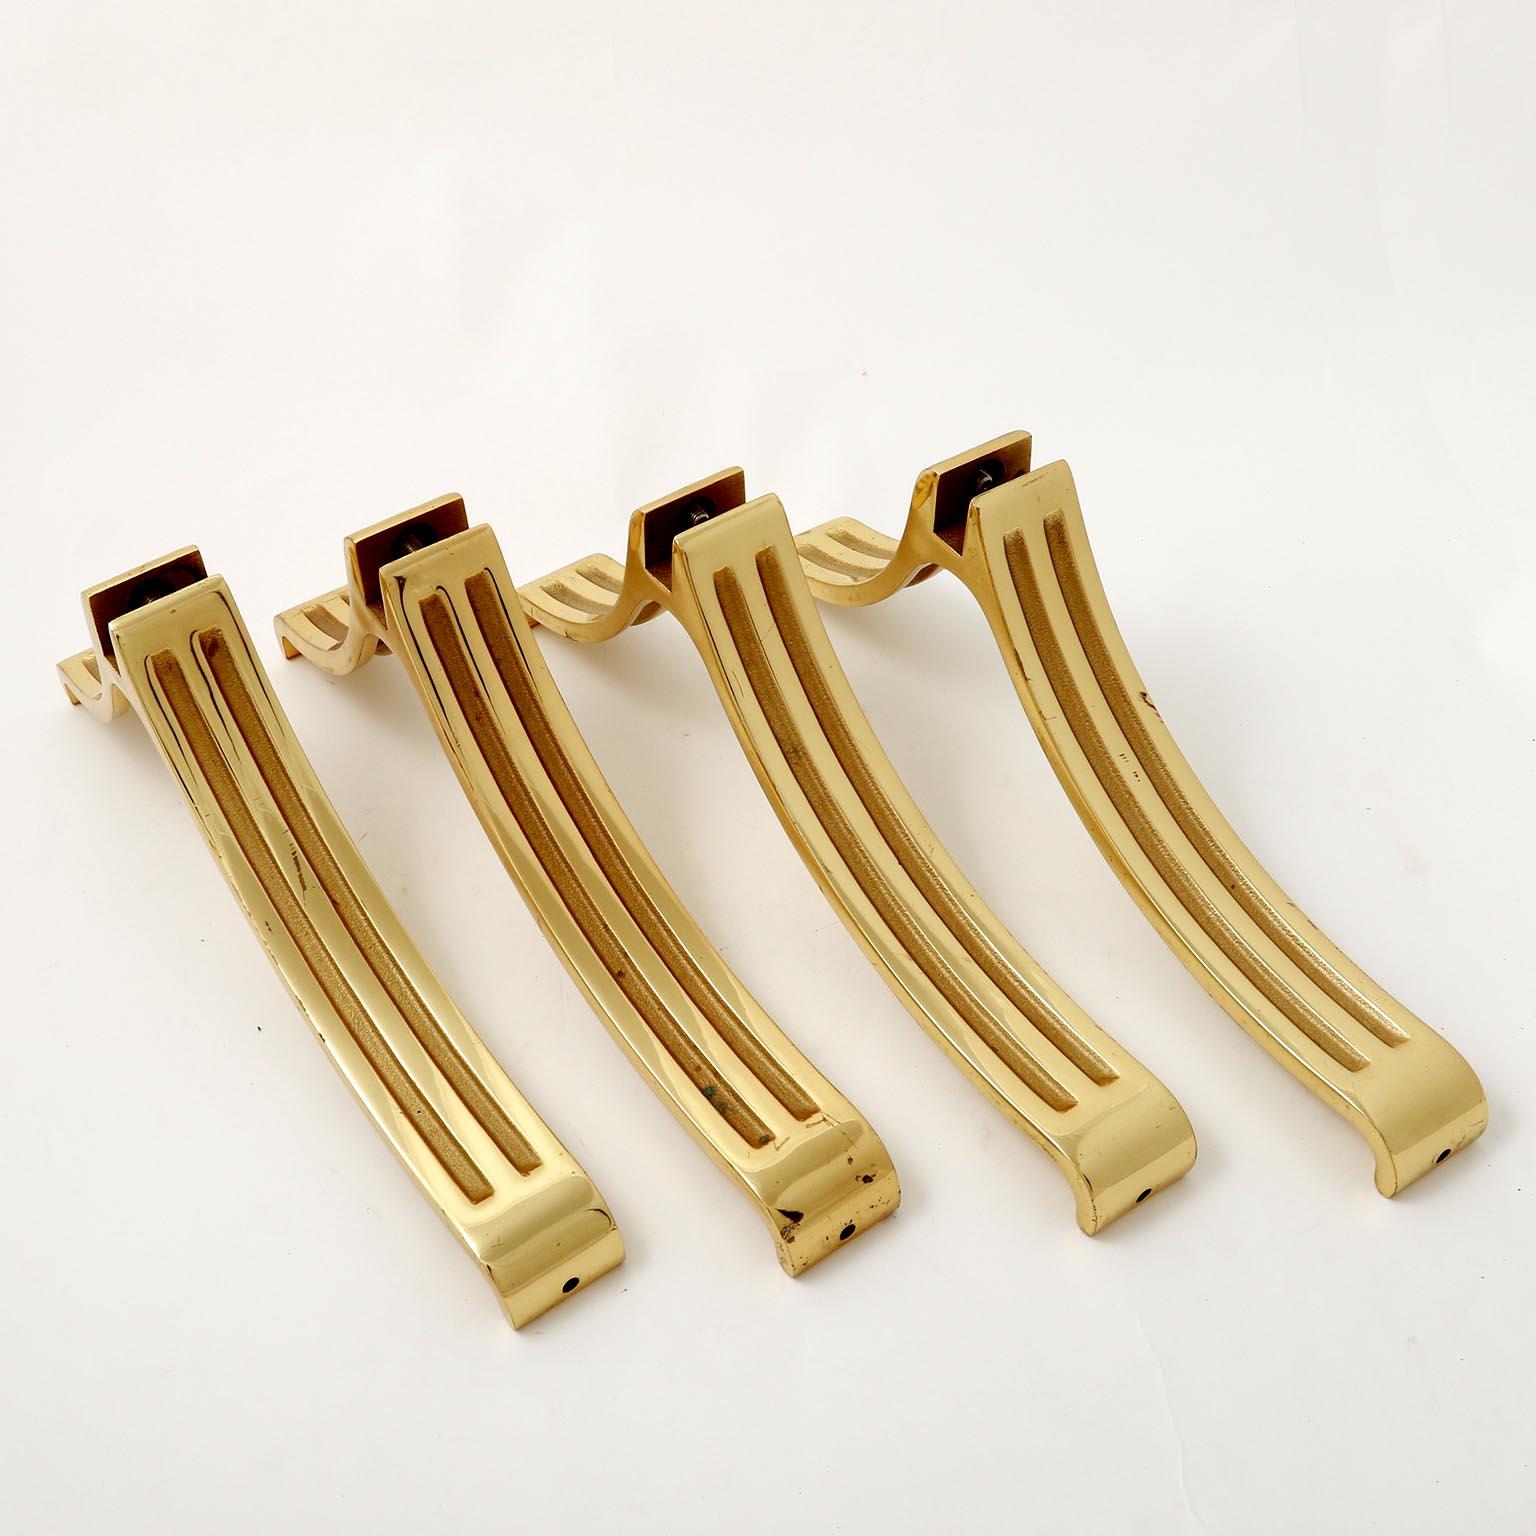 A set of four curved and polished brass legs manufactured in midcentury, circa 1970 (late 1960s or early 1970s).
They can be used for different cases: tables, floor or full length mirrors, sideboards, beds, etc.
Very good condition with little and